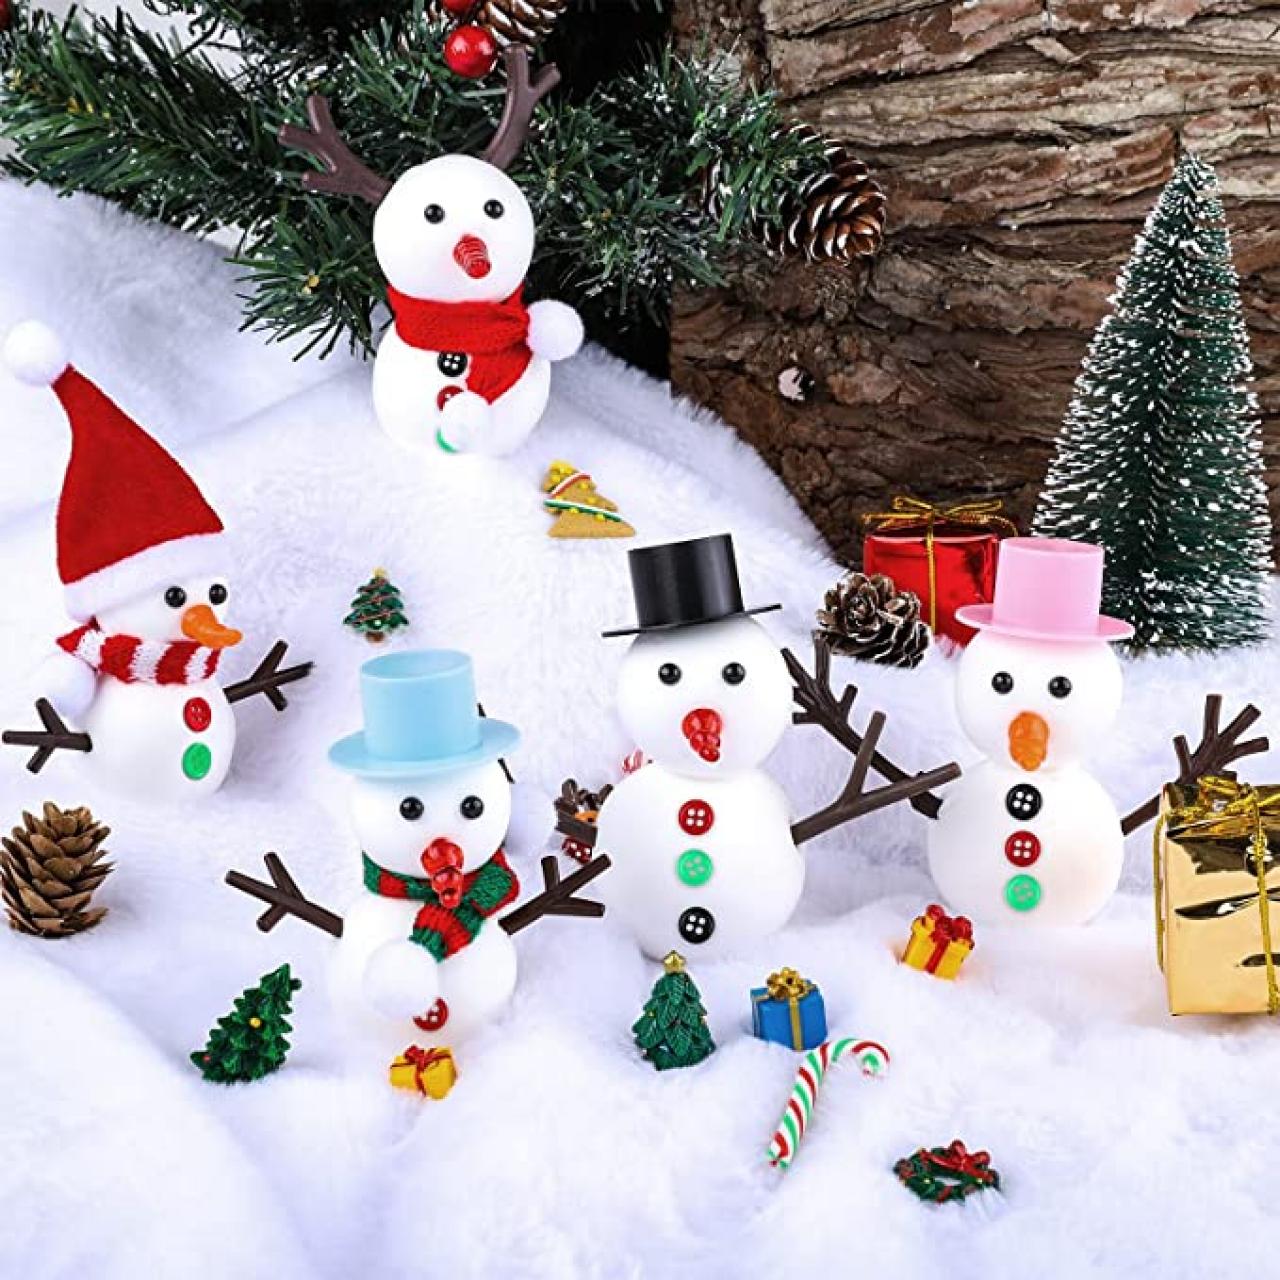 The Best Christmas Craft Kits for Adults in 2022